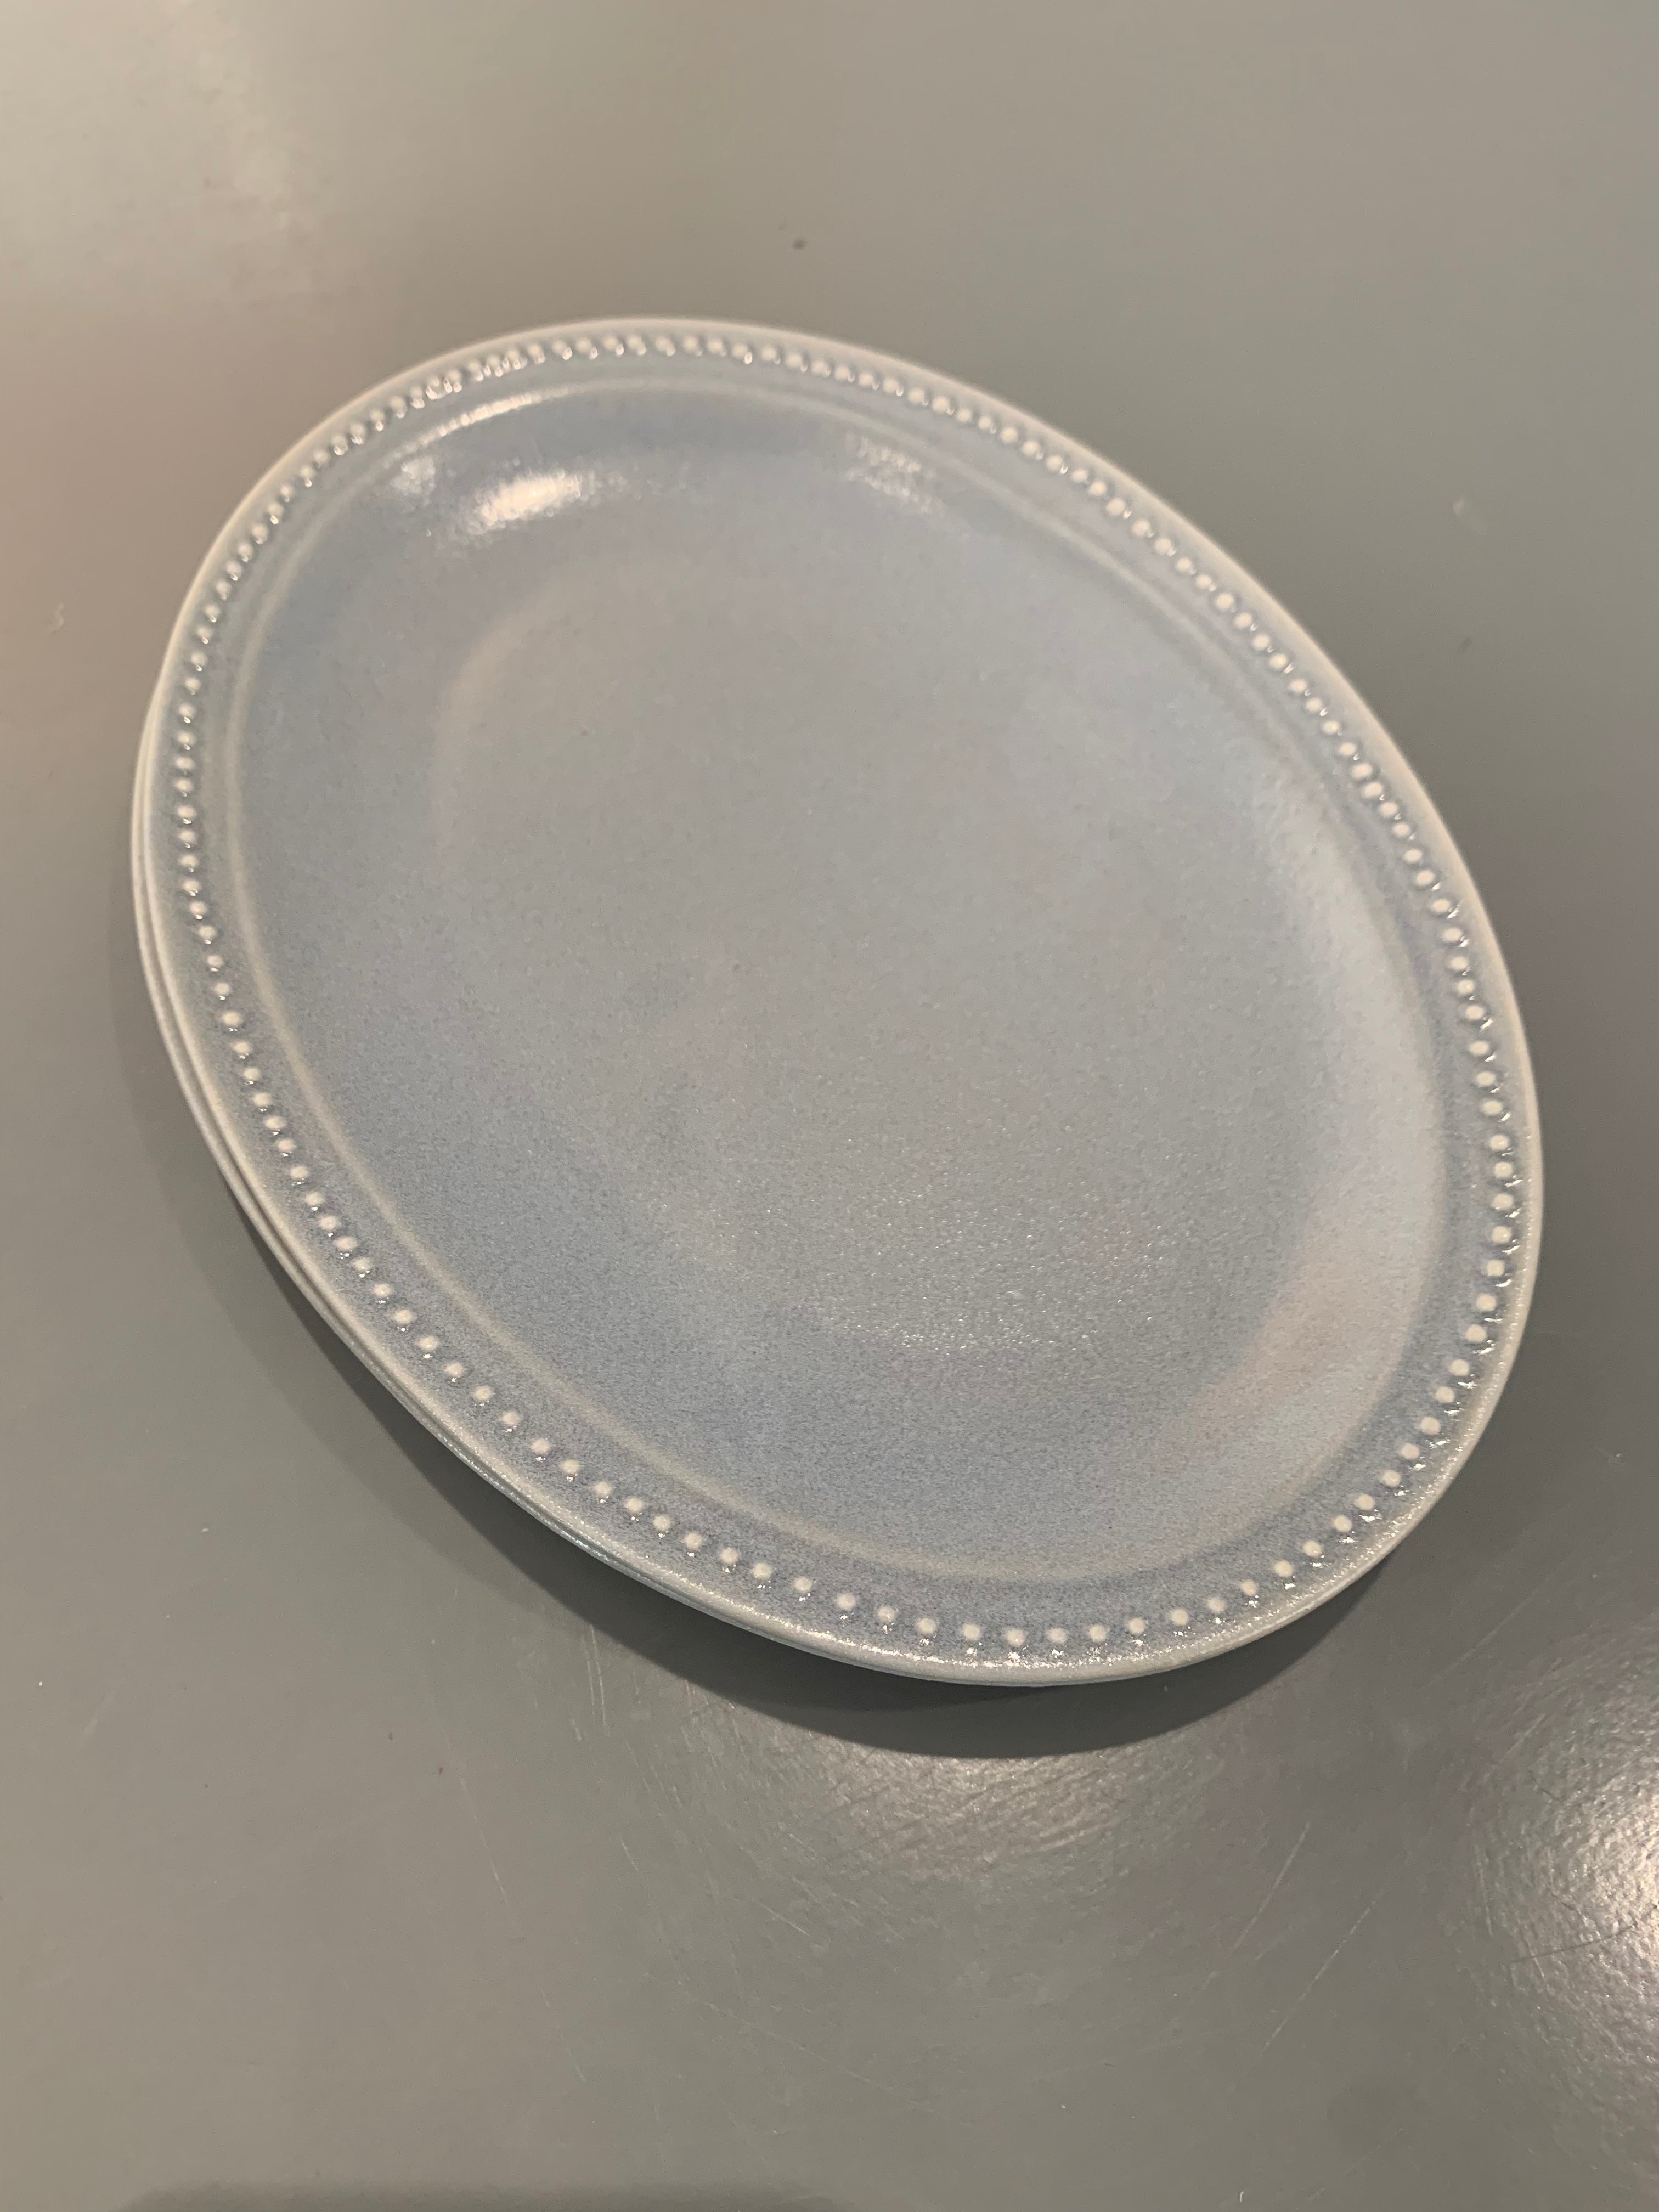 Light blue dish with dots on the edge, small